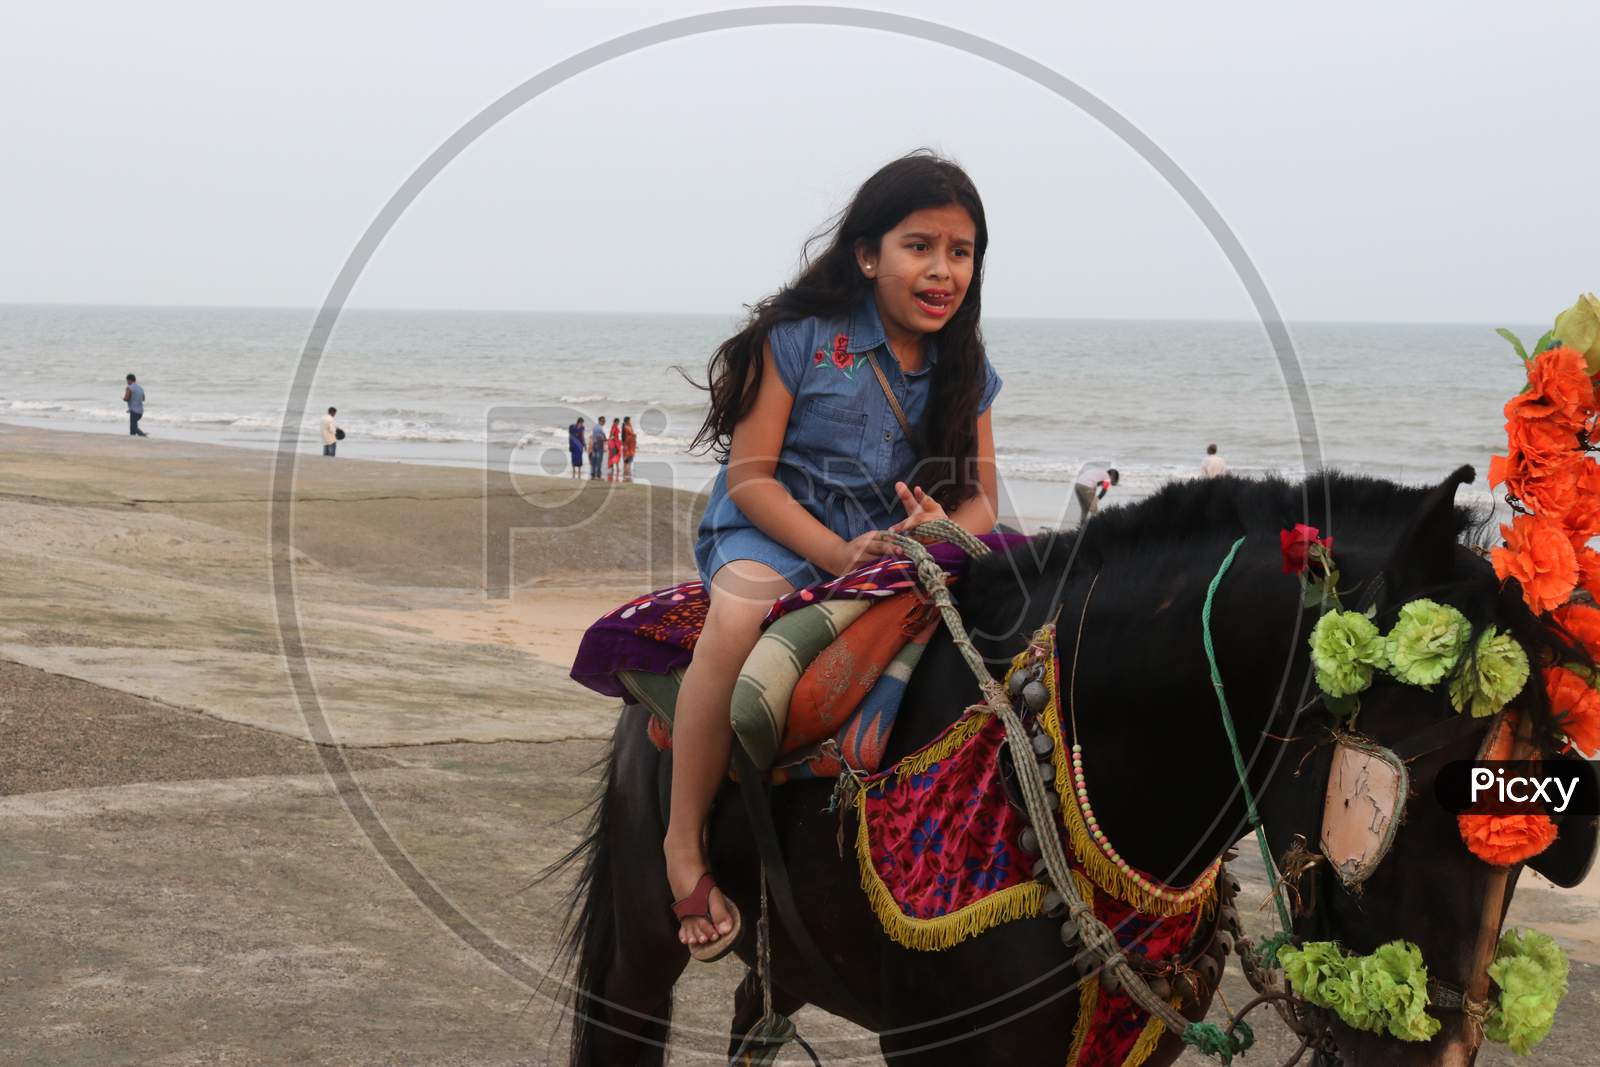 Horse riding at sea side